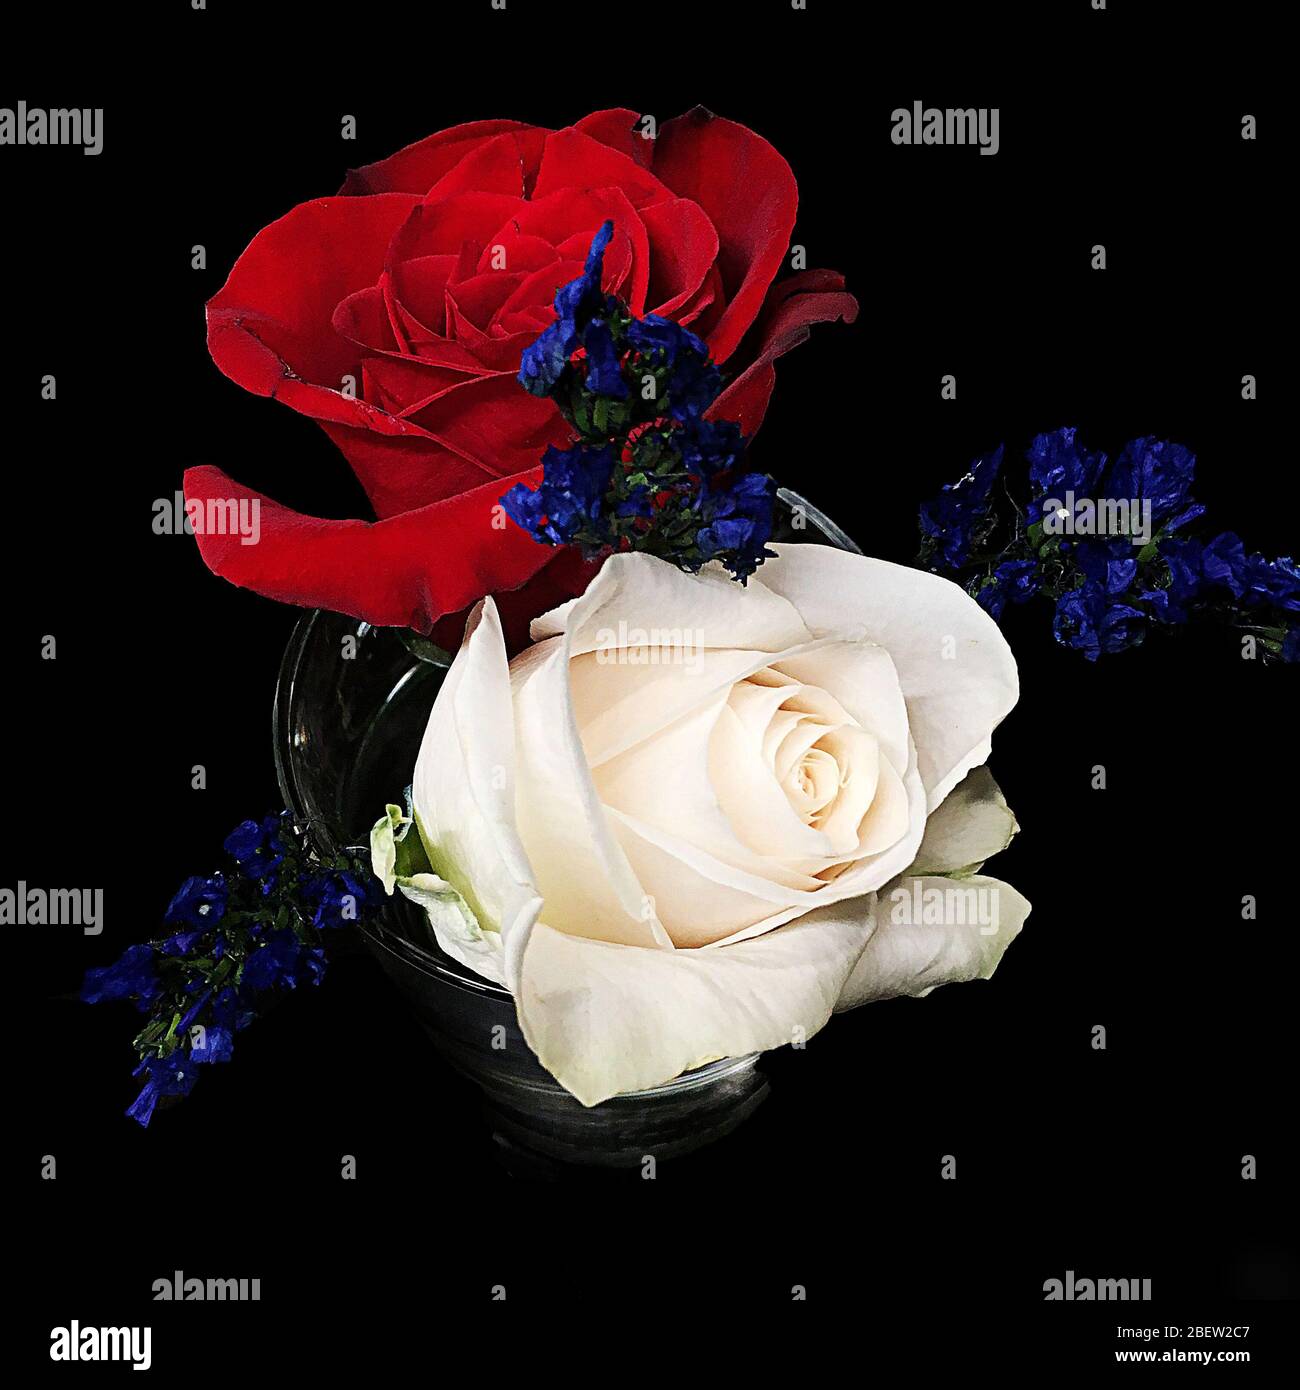 Red and White Roses with Small Violet Flowers on a Black Background Stock Photo